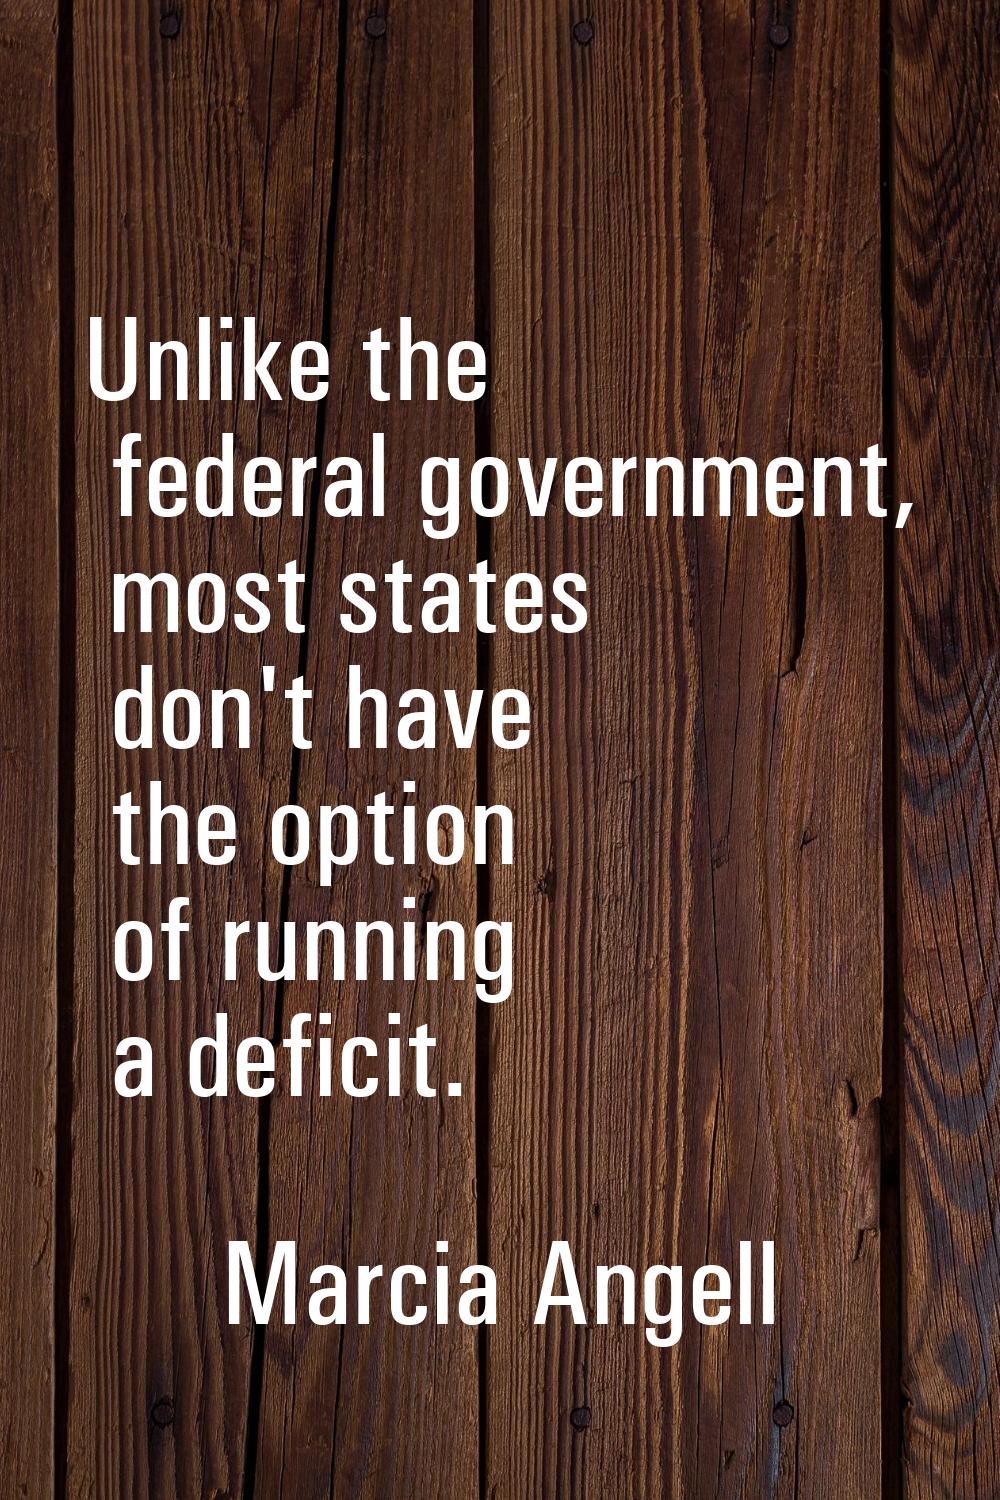 Unlike the federal government, most states don't have the option of running a deficit.